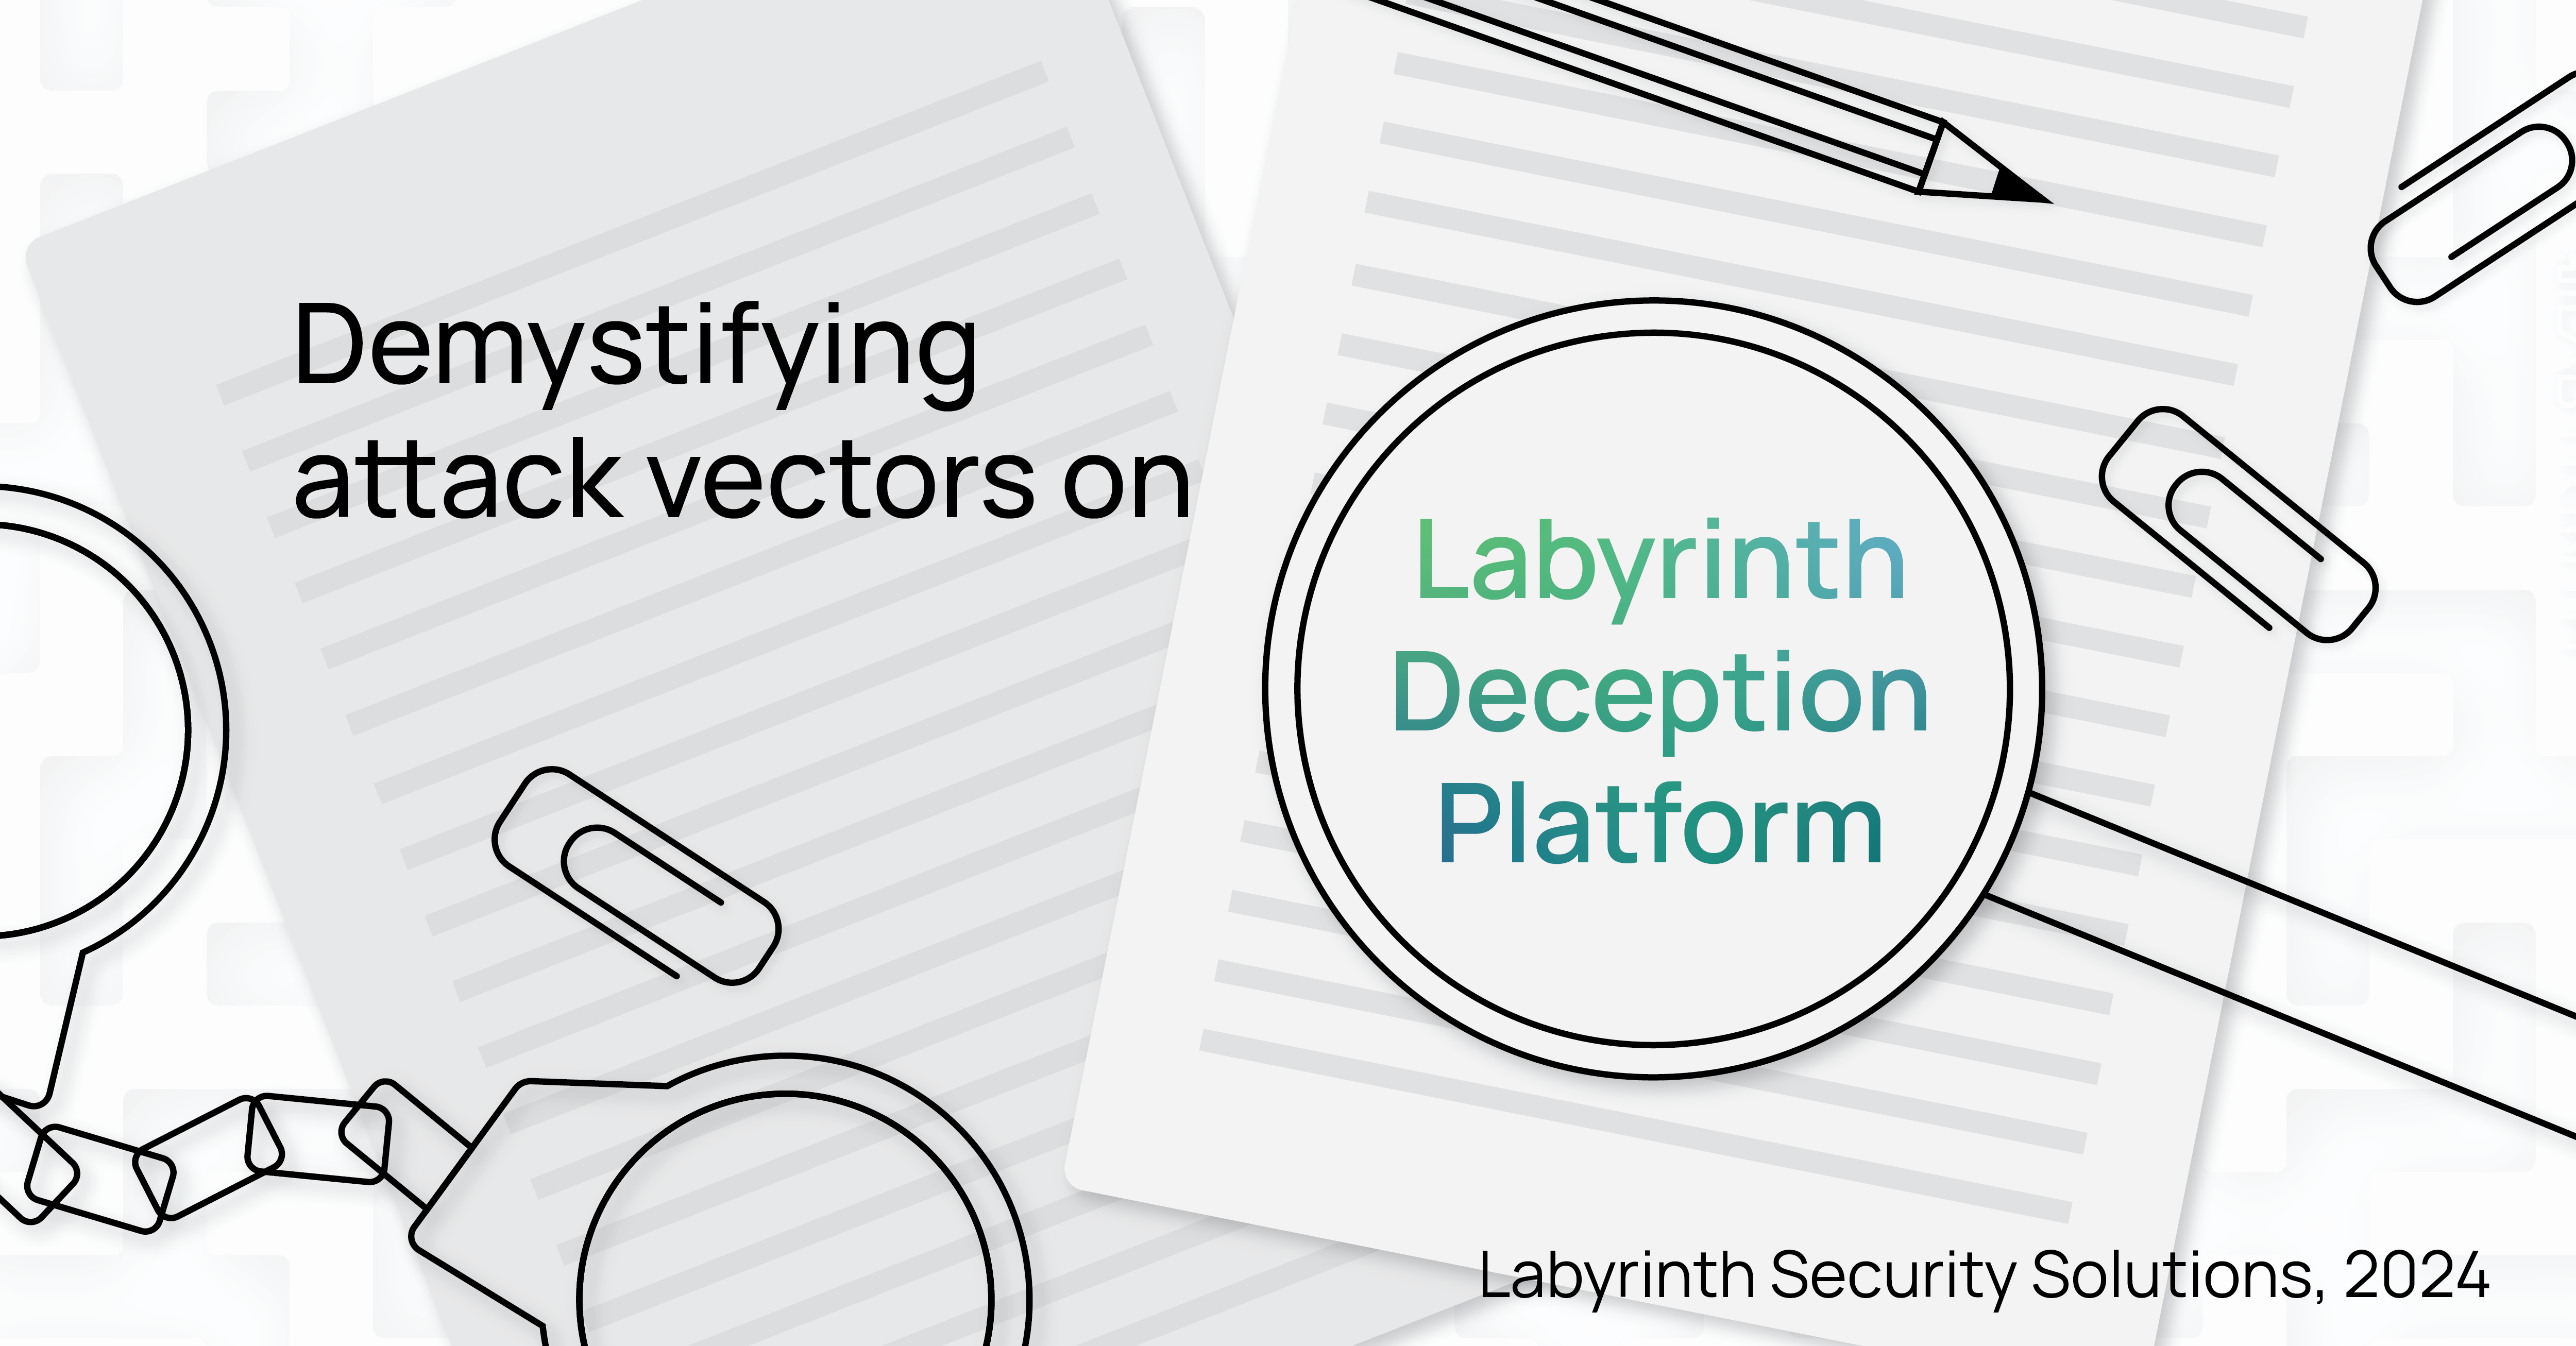 Demystifying attack vectors on the Labyrinth Deception Platform